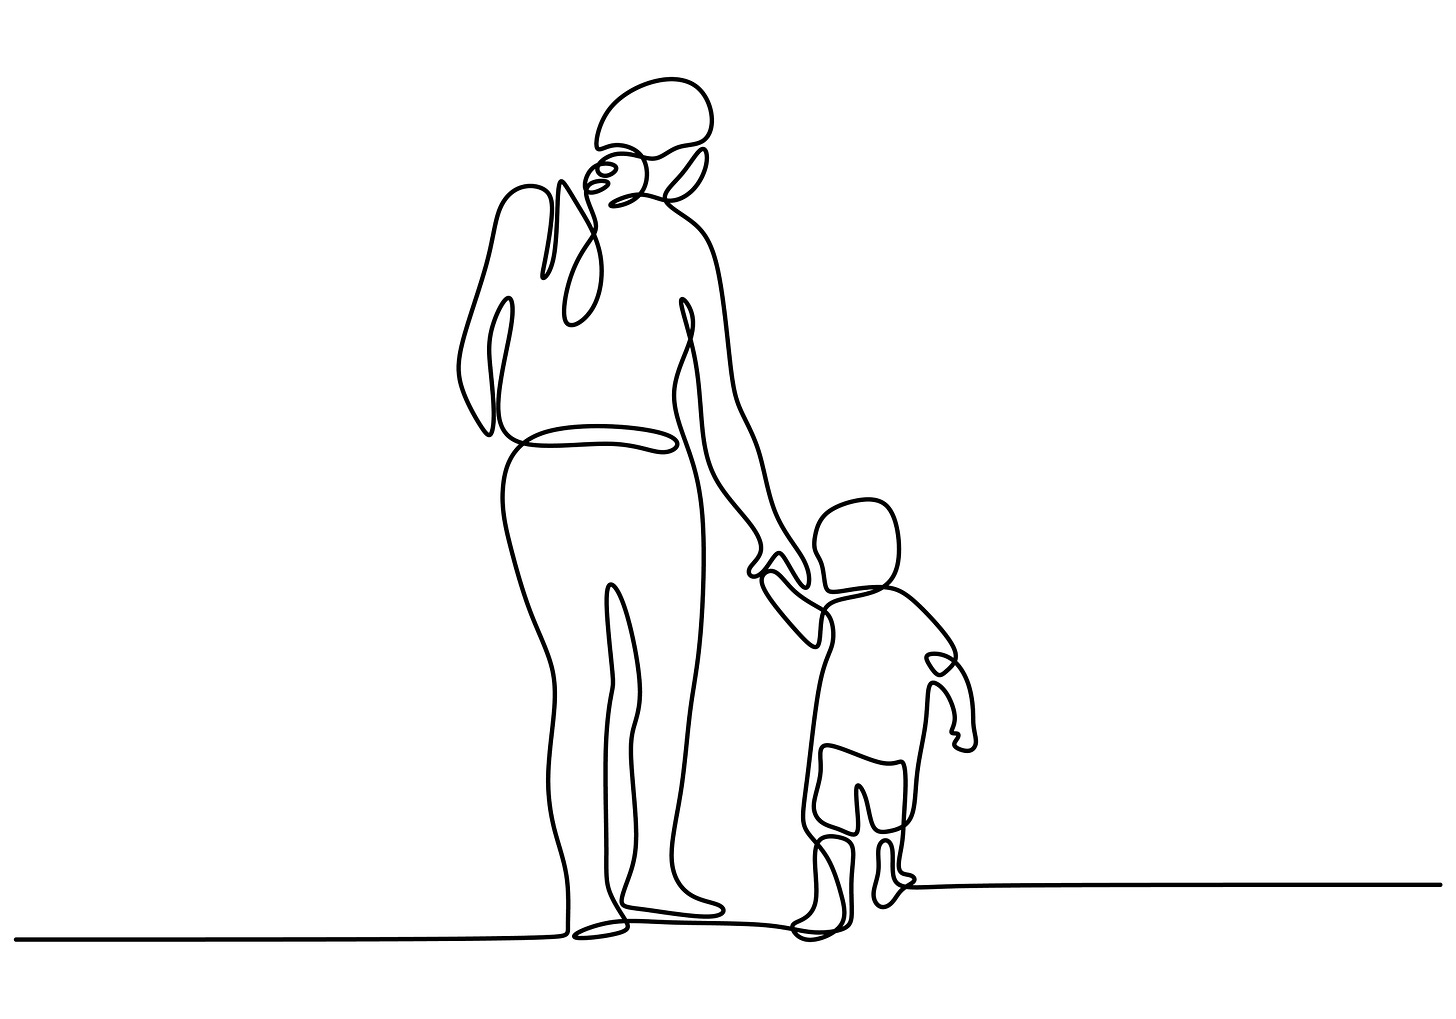 Line drawing of a mother holding hands with her child